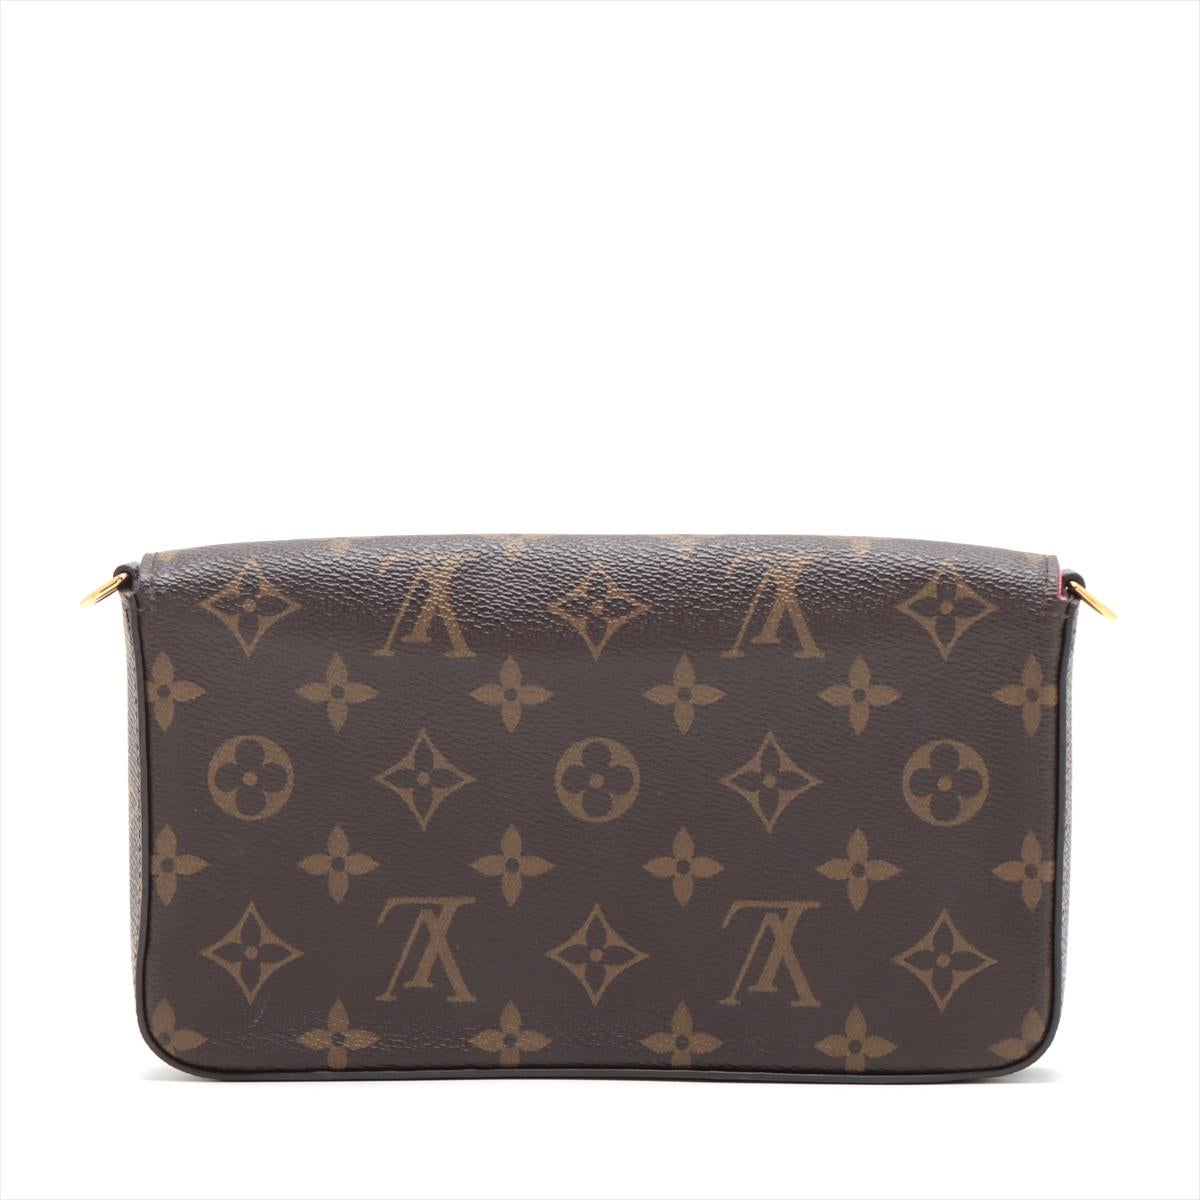 Louis Vuitton Monogram Pochette Felicie Vivienne Hollywood Fuchsia Pink In Good Condition For Sale In Indianapolis, IN